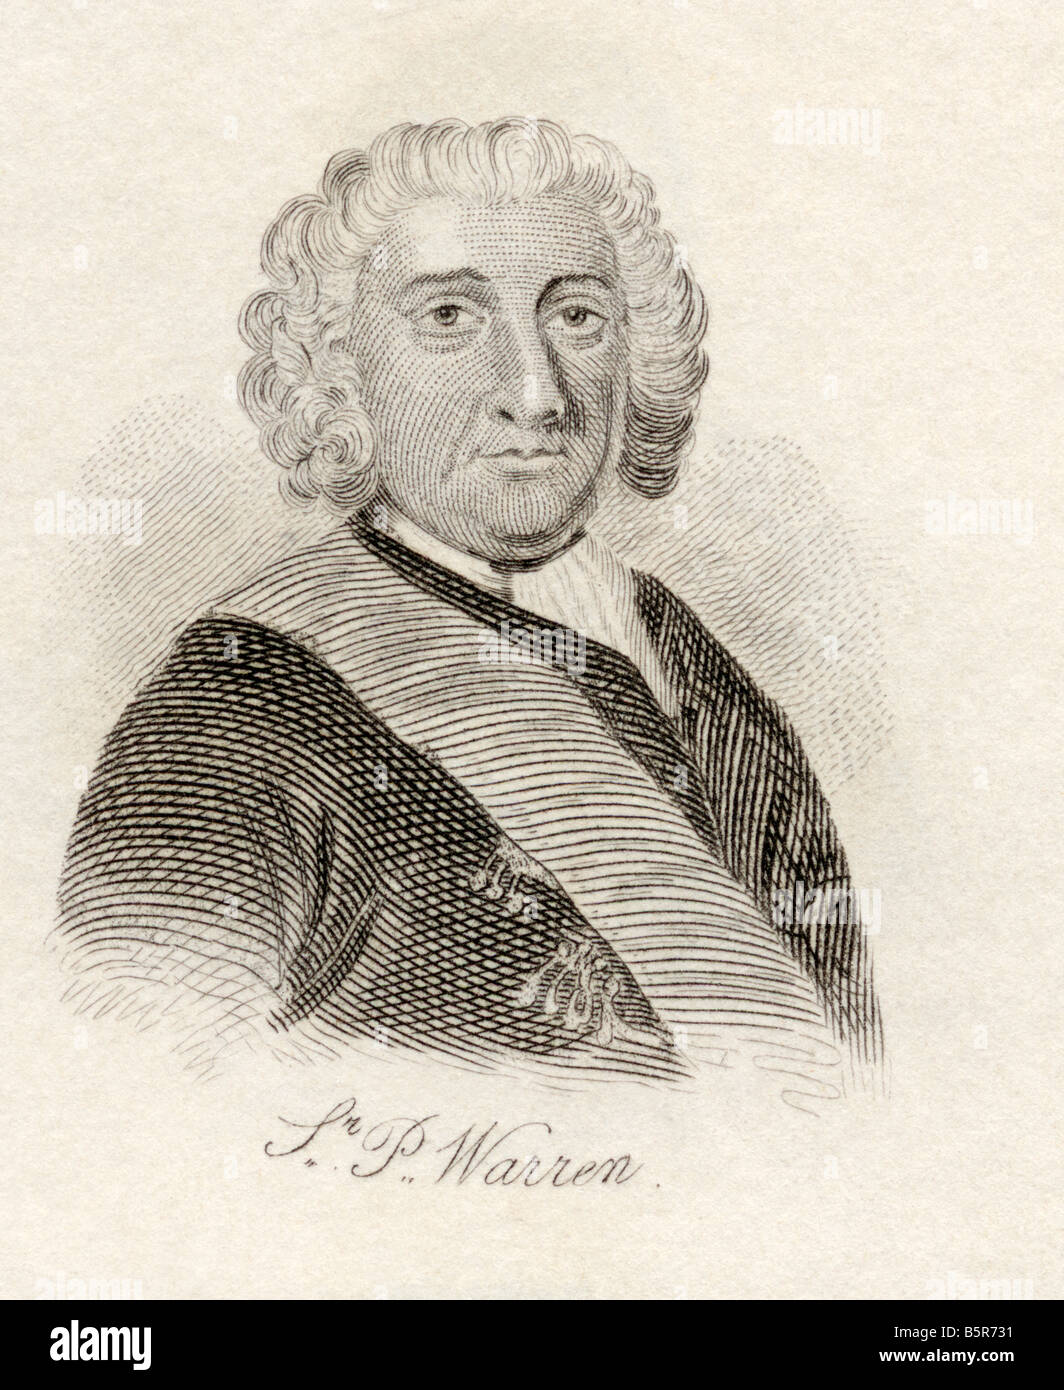 Admiral Sir Peter Warren. c.1703 - 1752. British naval officer.  From the book Crabb's Historical Dictionary, published 1825. Stock Photo